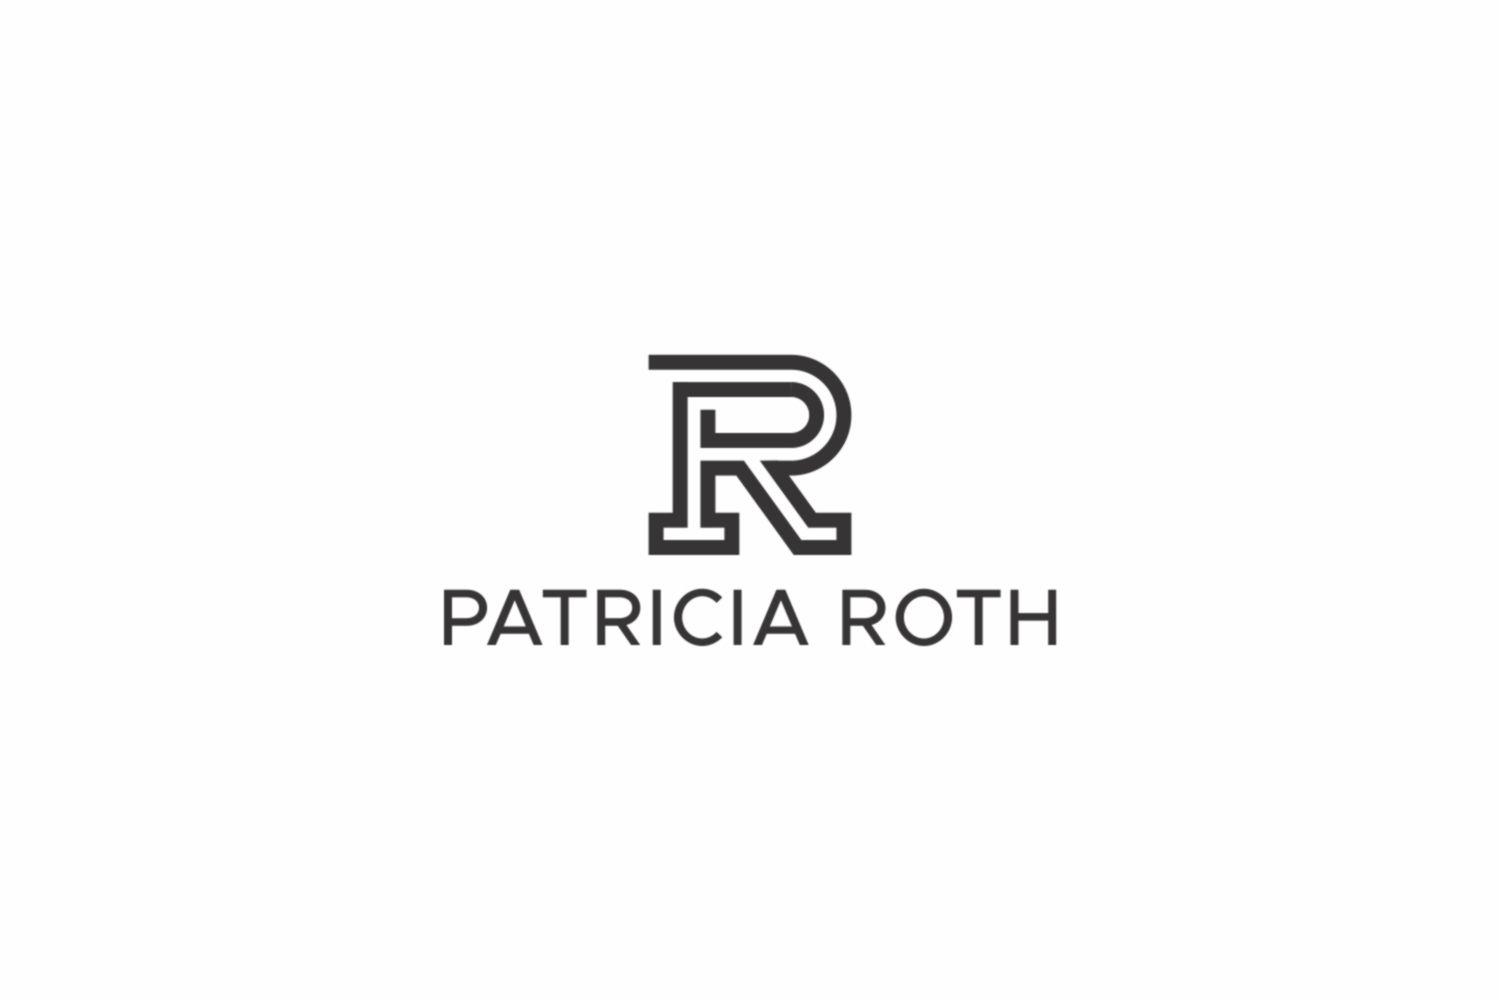 P and R Logo - Logo Design for I want two things in the logo. Patricia Roth and a